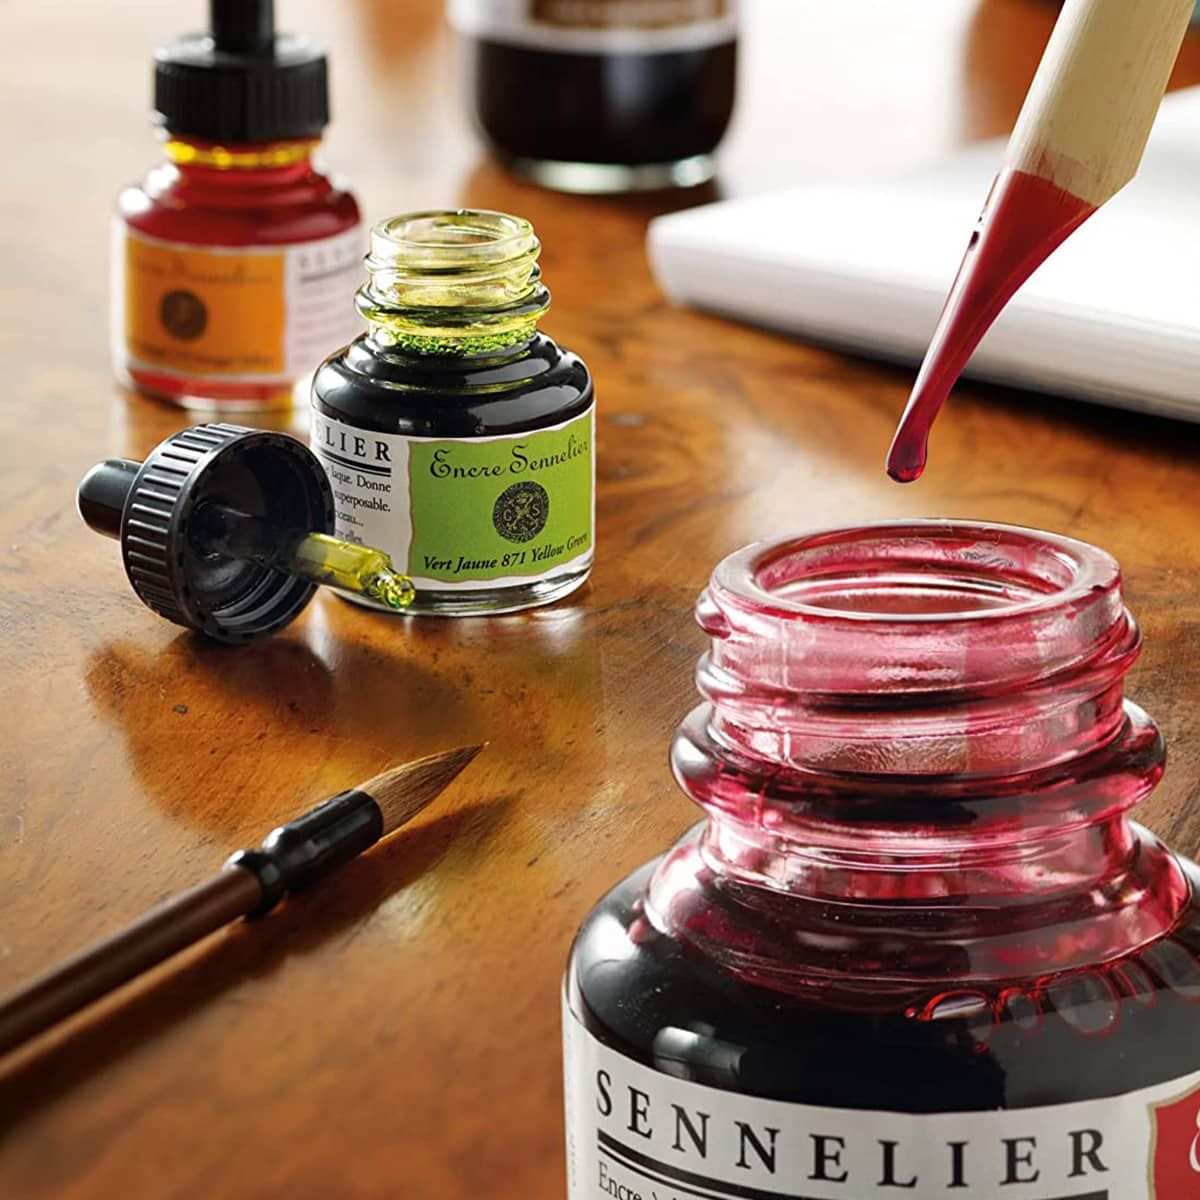 Extremely rich, these inks are made with shellac gum binder giving each shade a unique brilliance, brightness and vibration under light